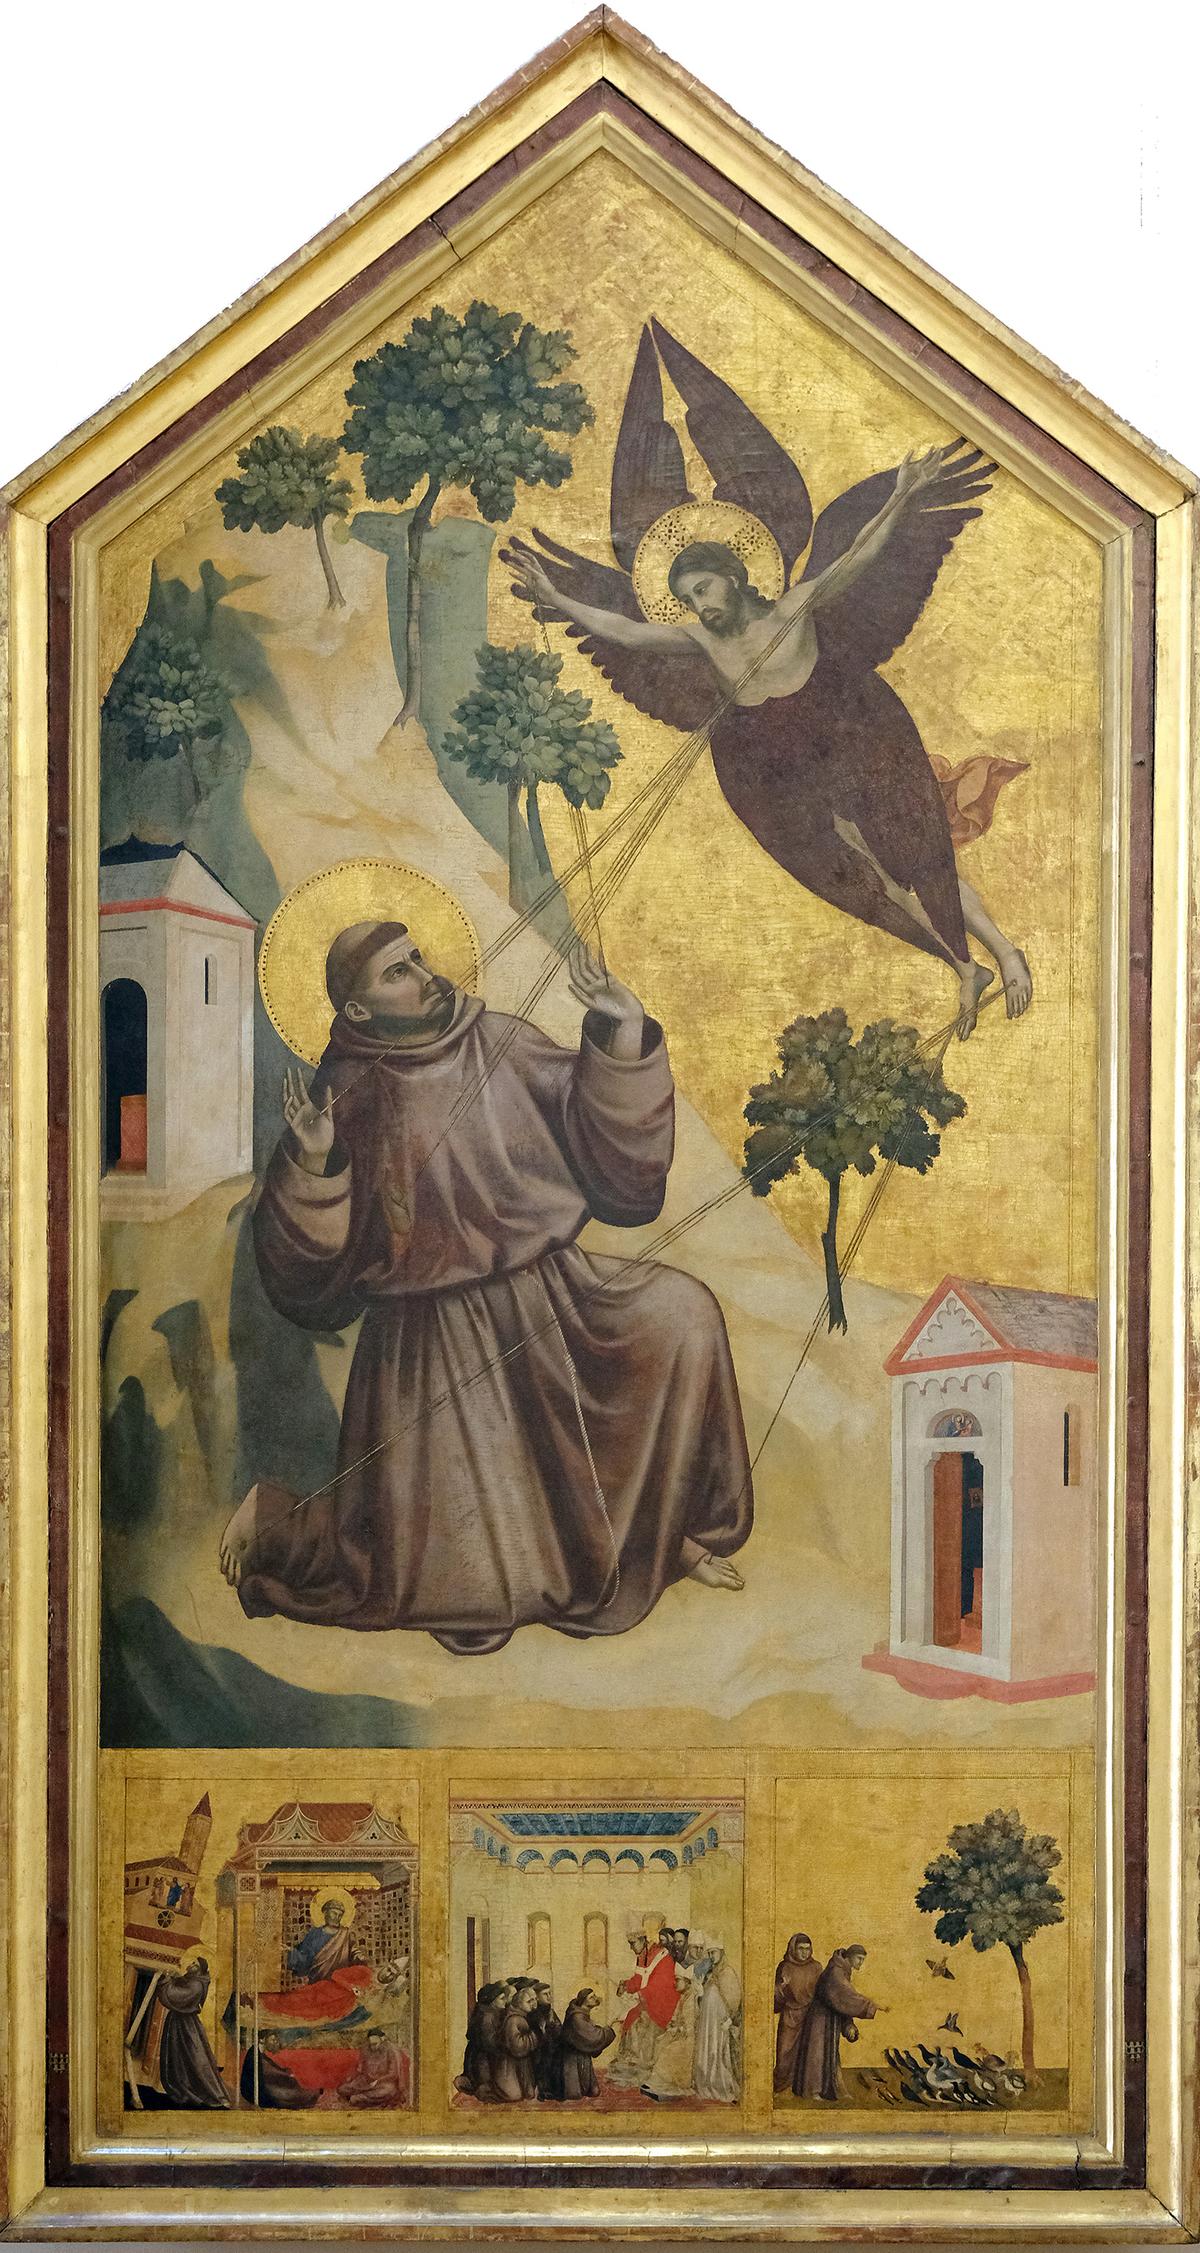 “St. Francis of Assisi Receiving the Stigmata," circa 1297–1299, by Giotto di Bondone. Tempera and gold on poplar wood; 122 2/5 inches by 64 inches. Louvre Museum, Paris. (Public Domain)